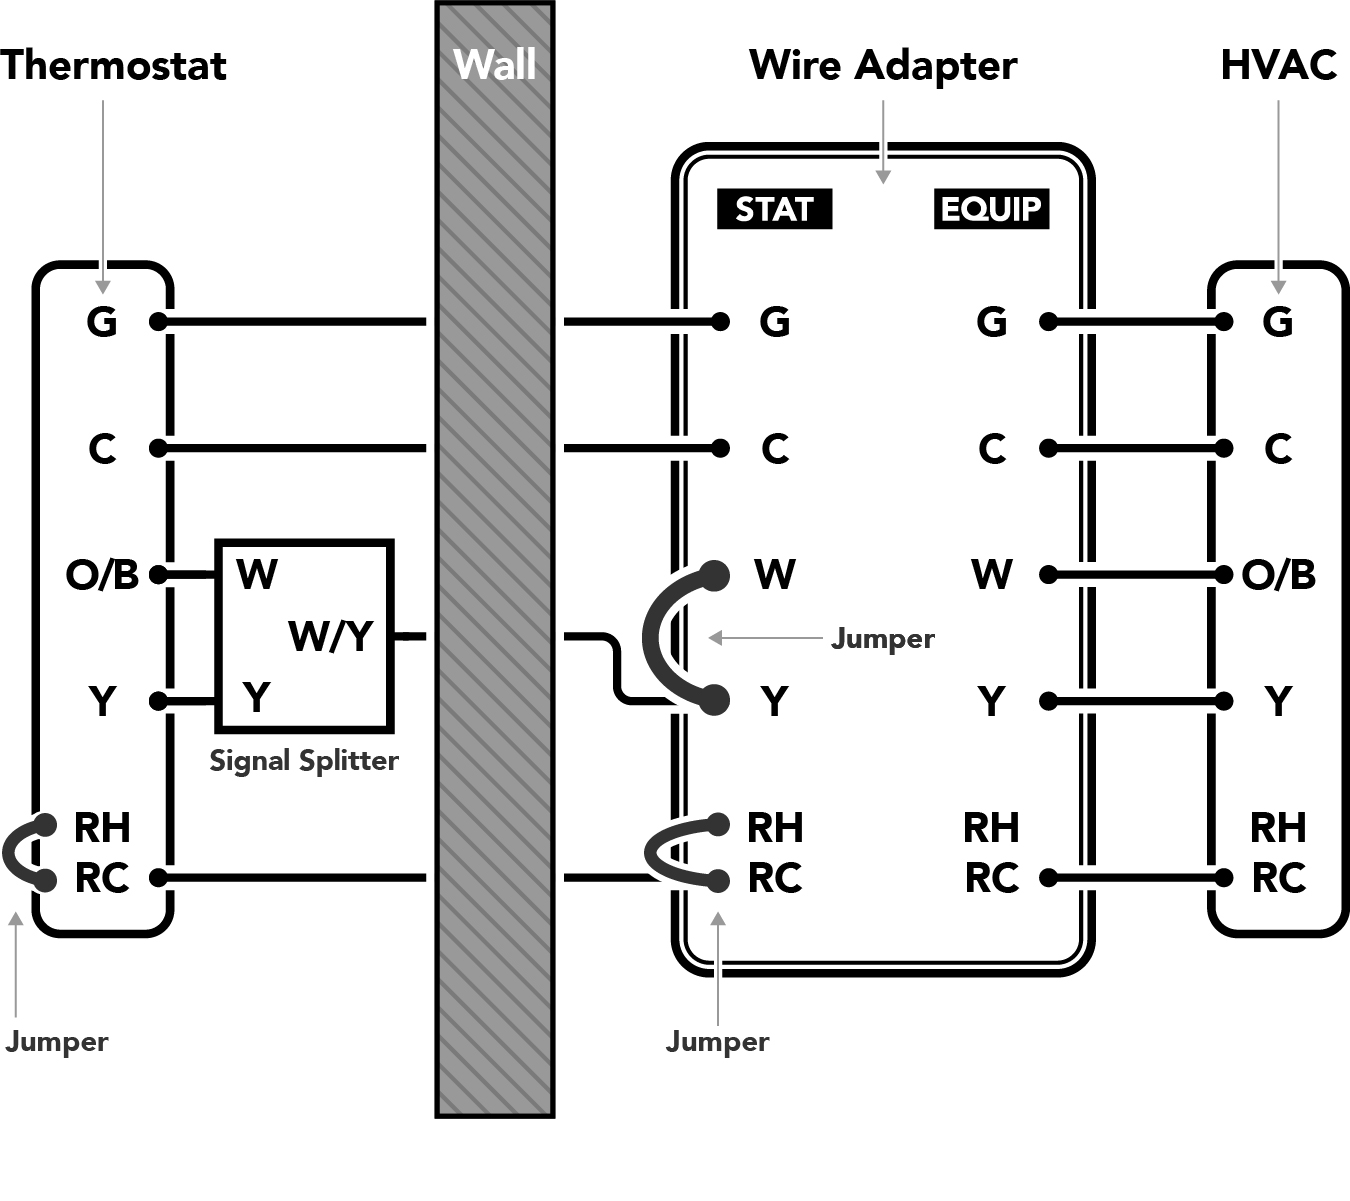 Diagram-05_Conventional-Heat-Pump-System_2015-11-18_V1_Conventional_Heat-and-AC_4-Wires_copy_2.jpg